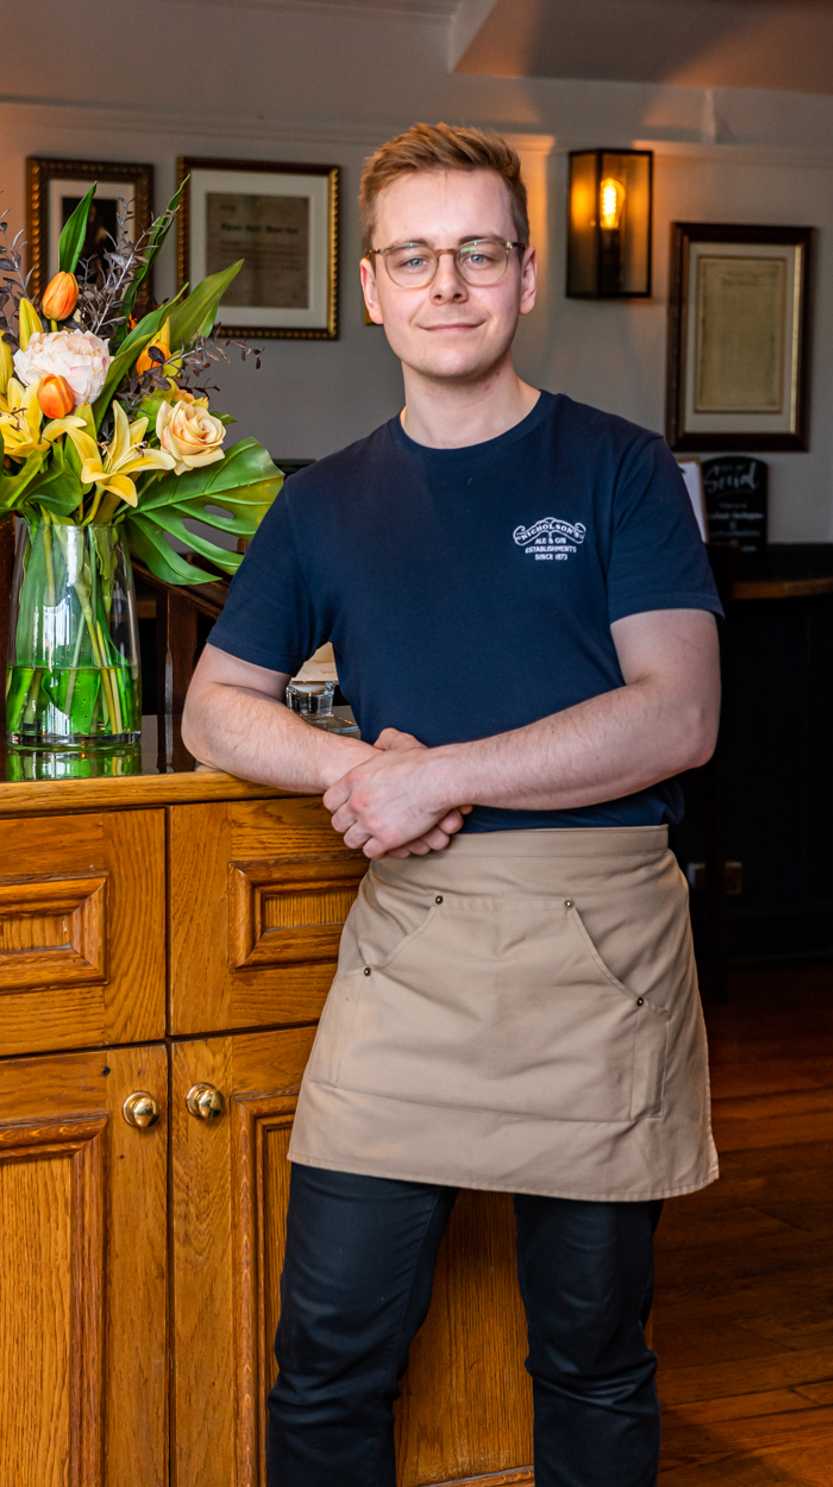 A team member in a blue t-shirt and brown apron leans against a cabinet, with fresh flowers in a vase on top.